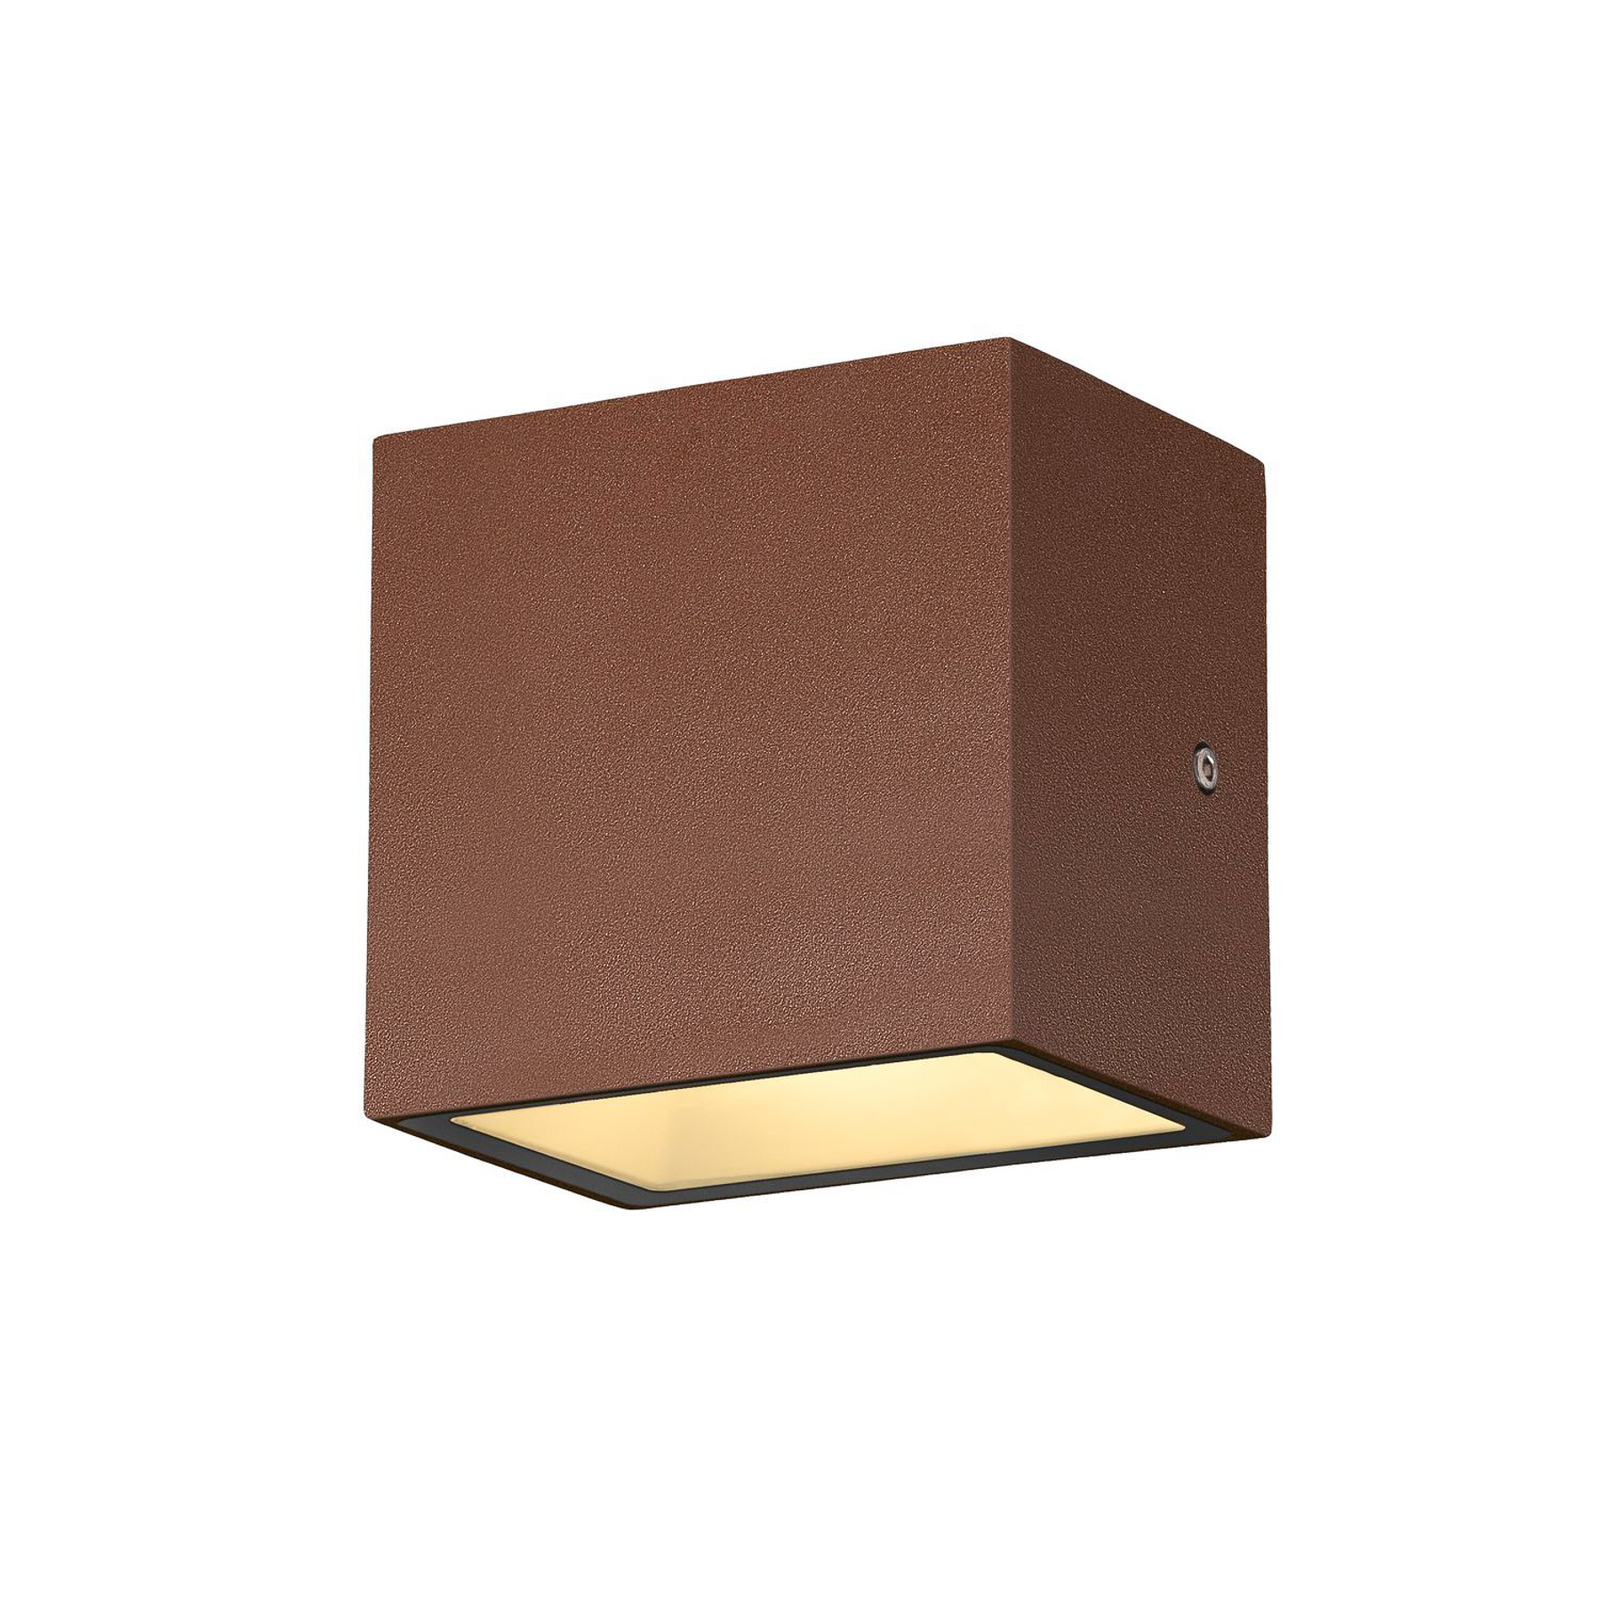 SLV Sitra Single LED outdoor wall light down, rust